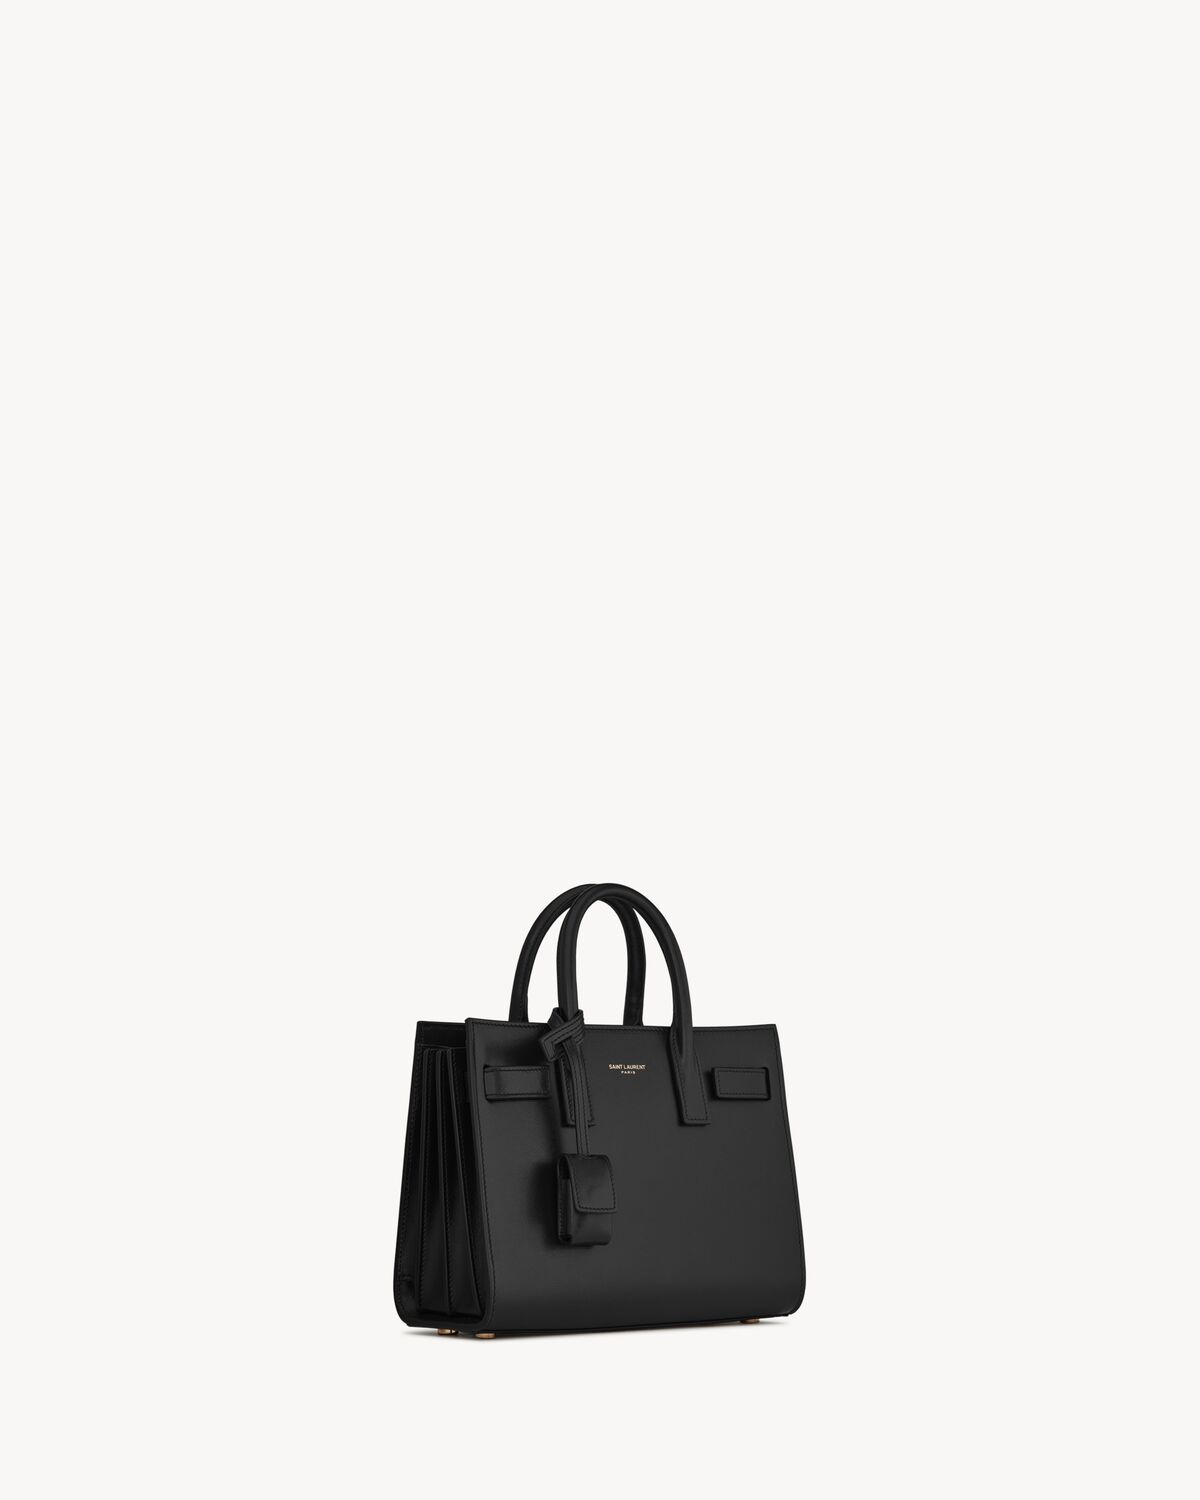 SAC DE JOUR NANO IN SMOOTH LEATHER